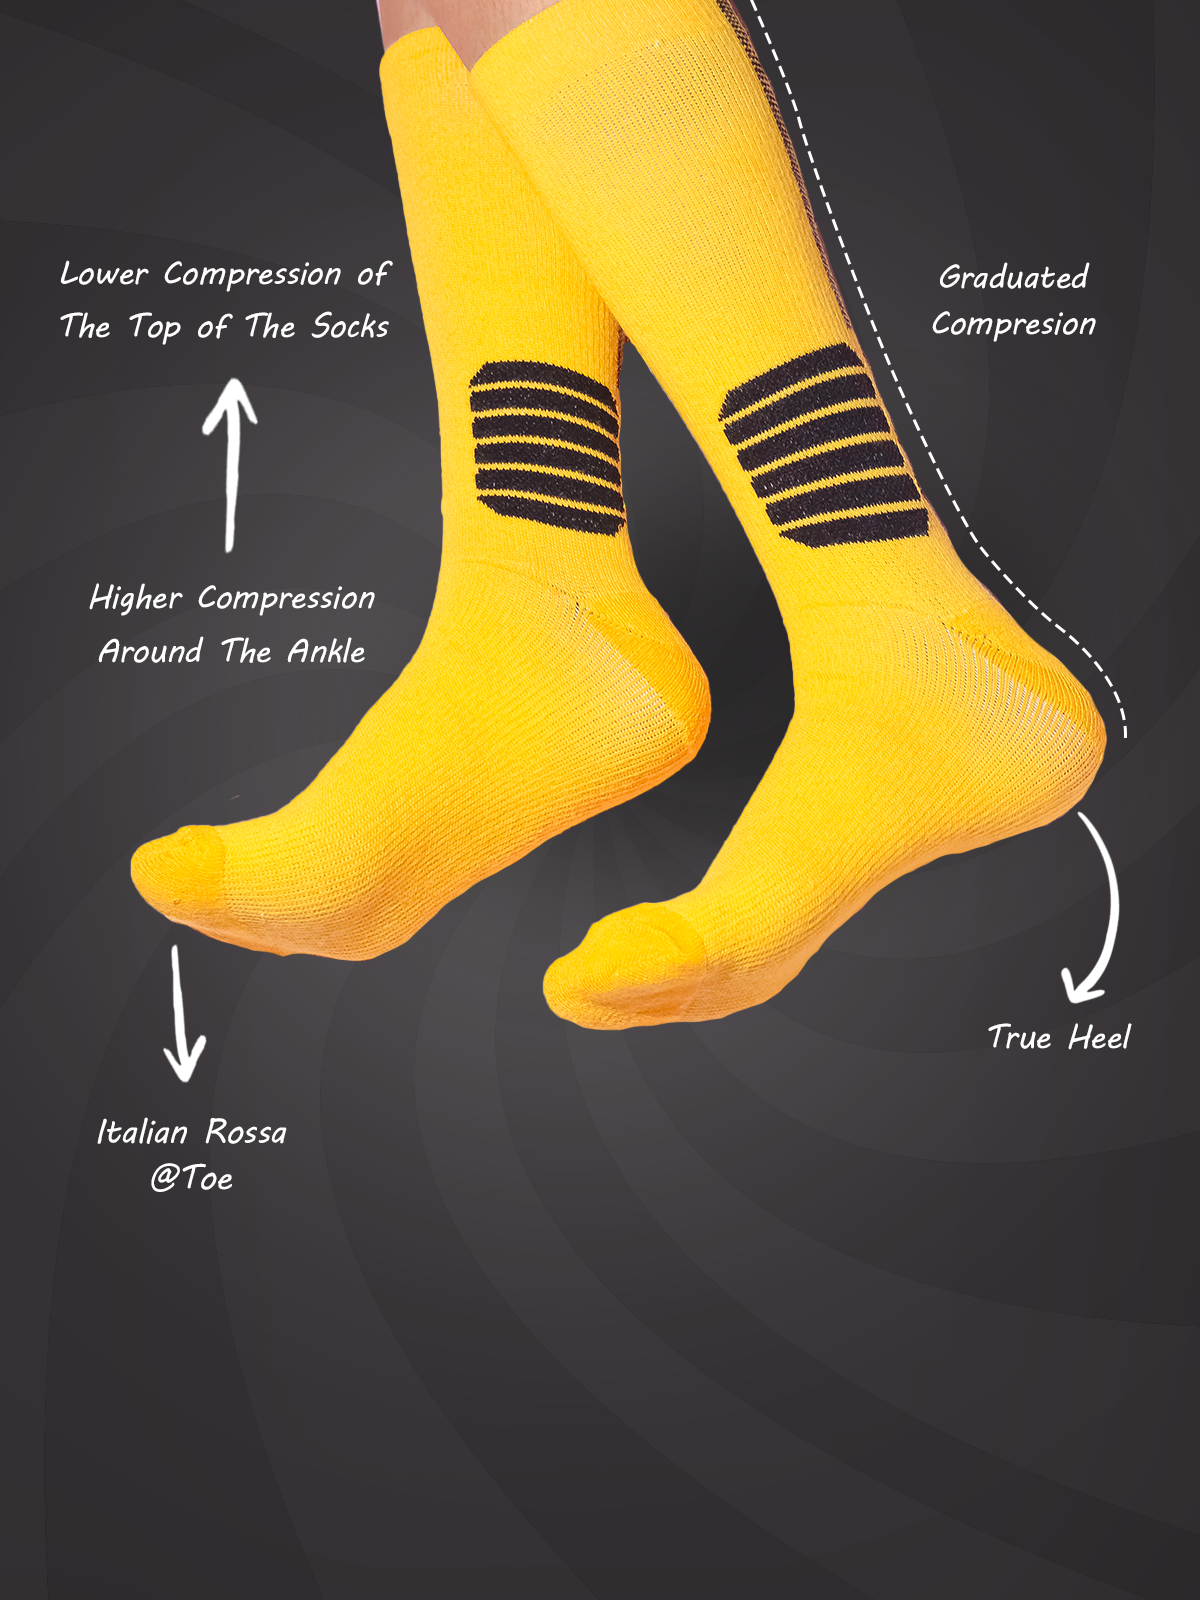 Happy Socks review: Are these eccentric socks any good? - Reviewed